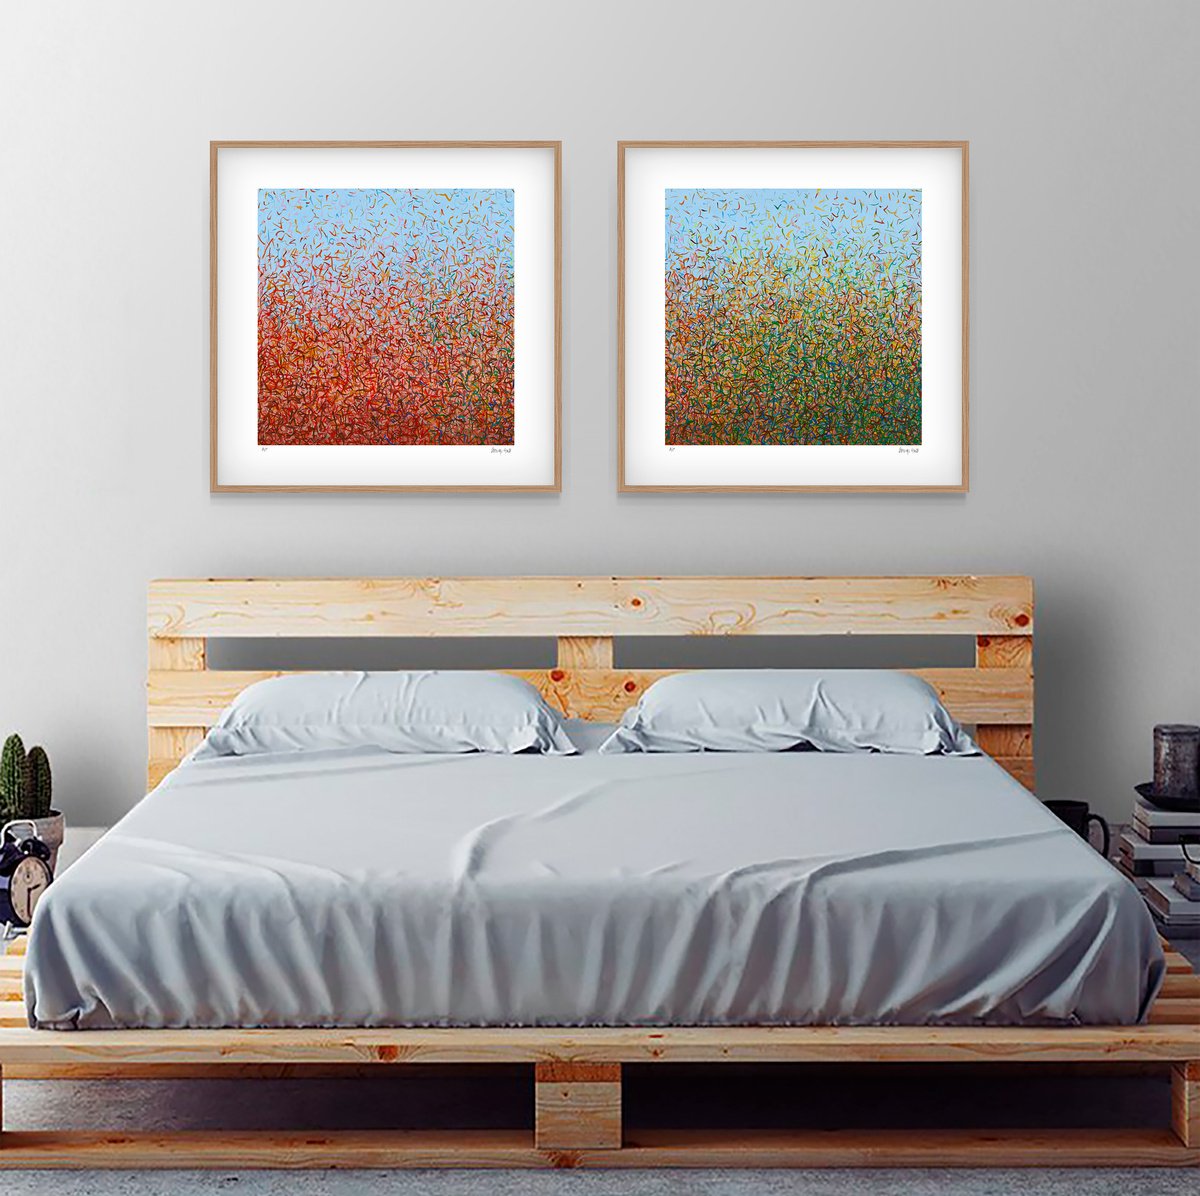 Oodnadatta Series - Set of 2 - 84cm ea - Limited Edition Paper Prints *UNFRAMED* by George Hall